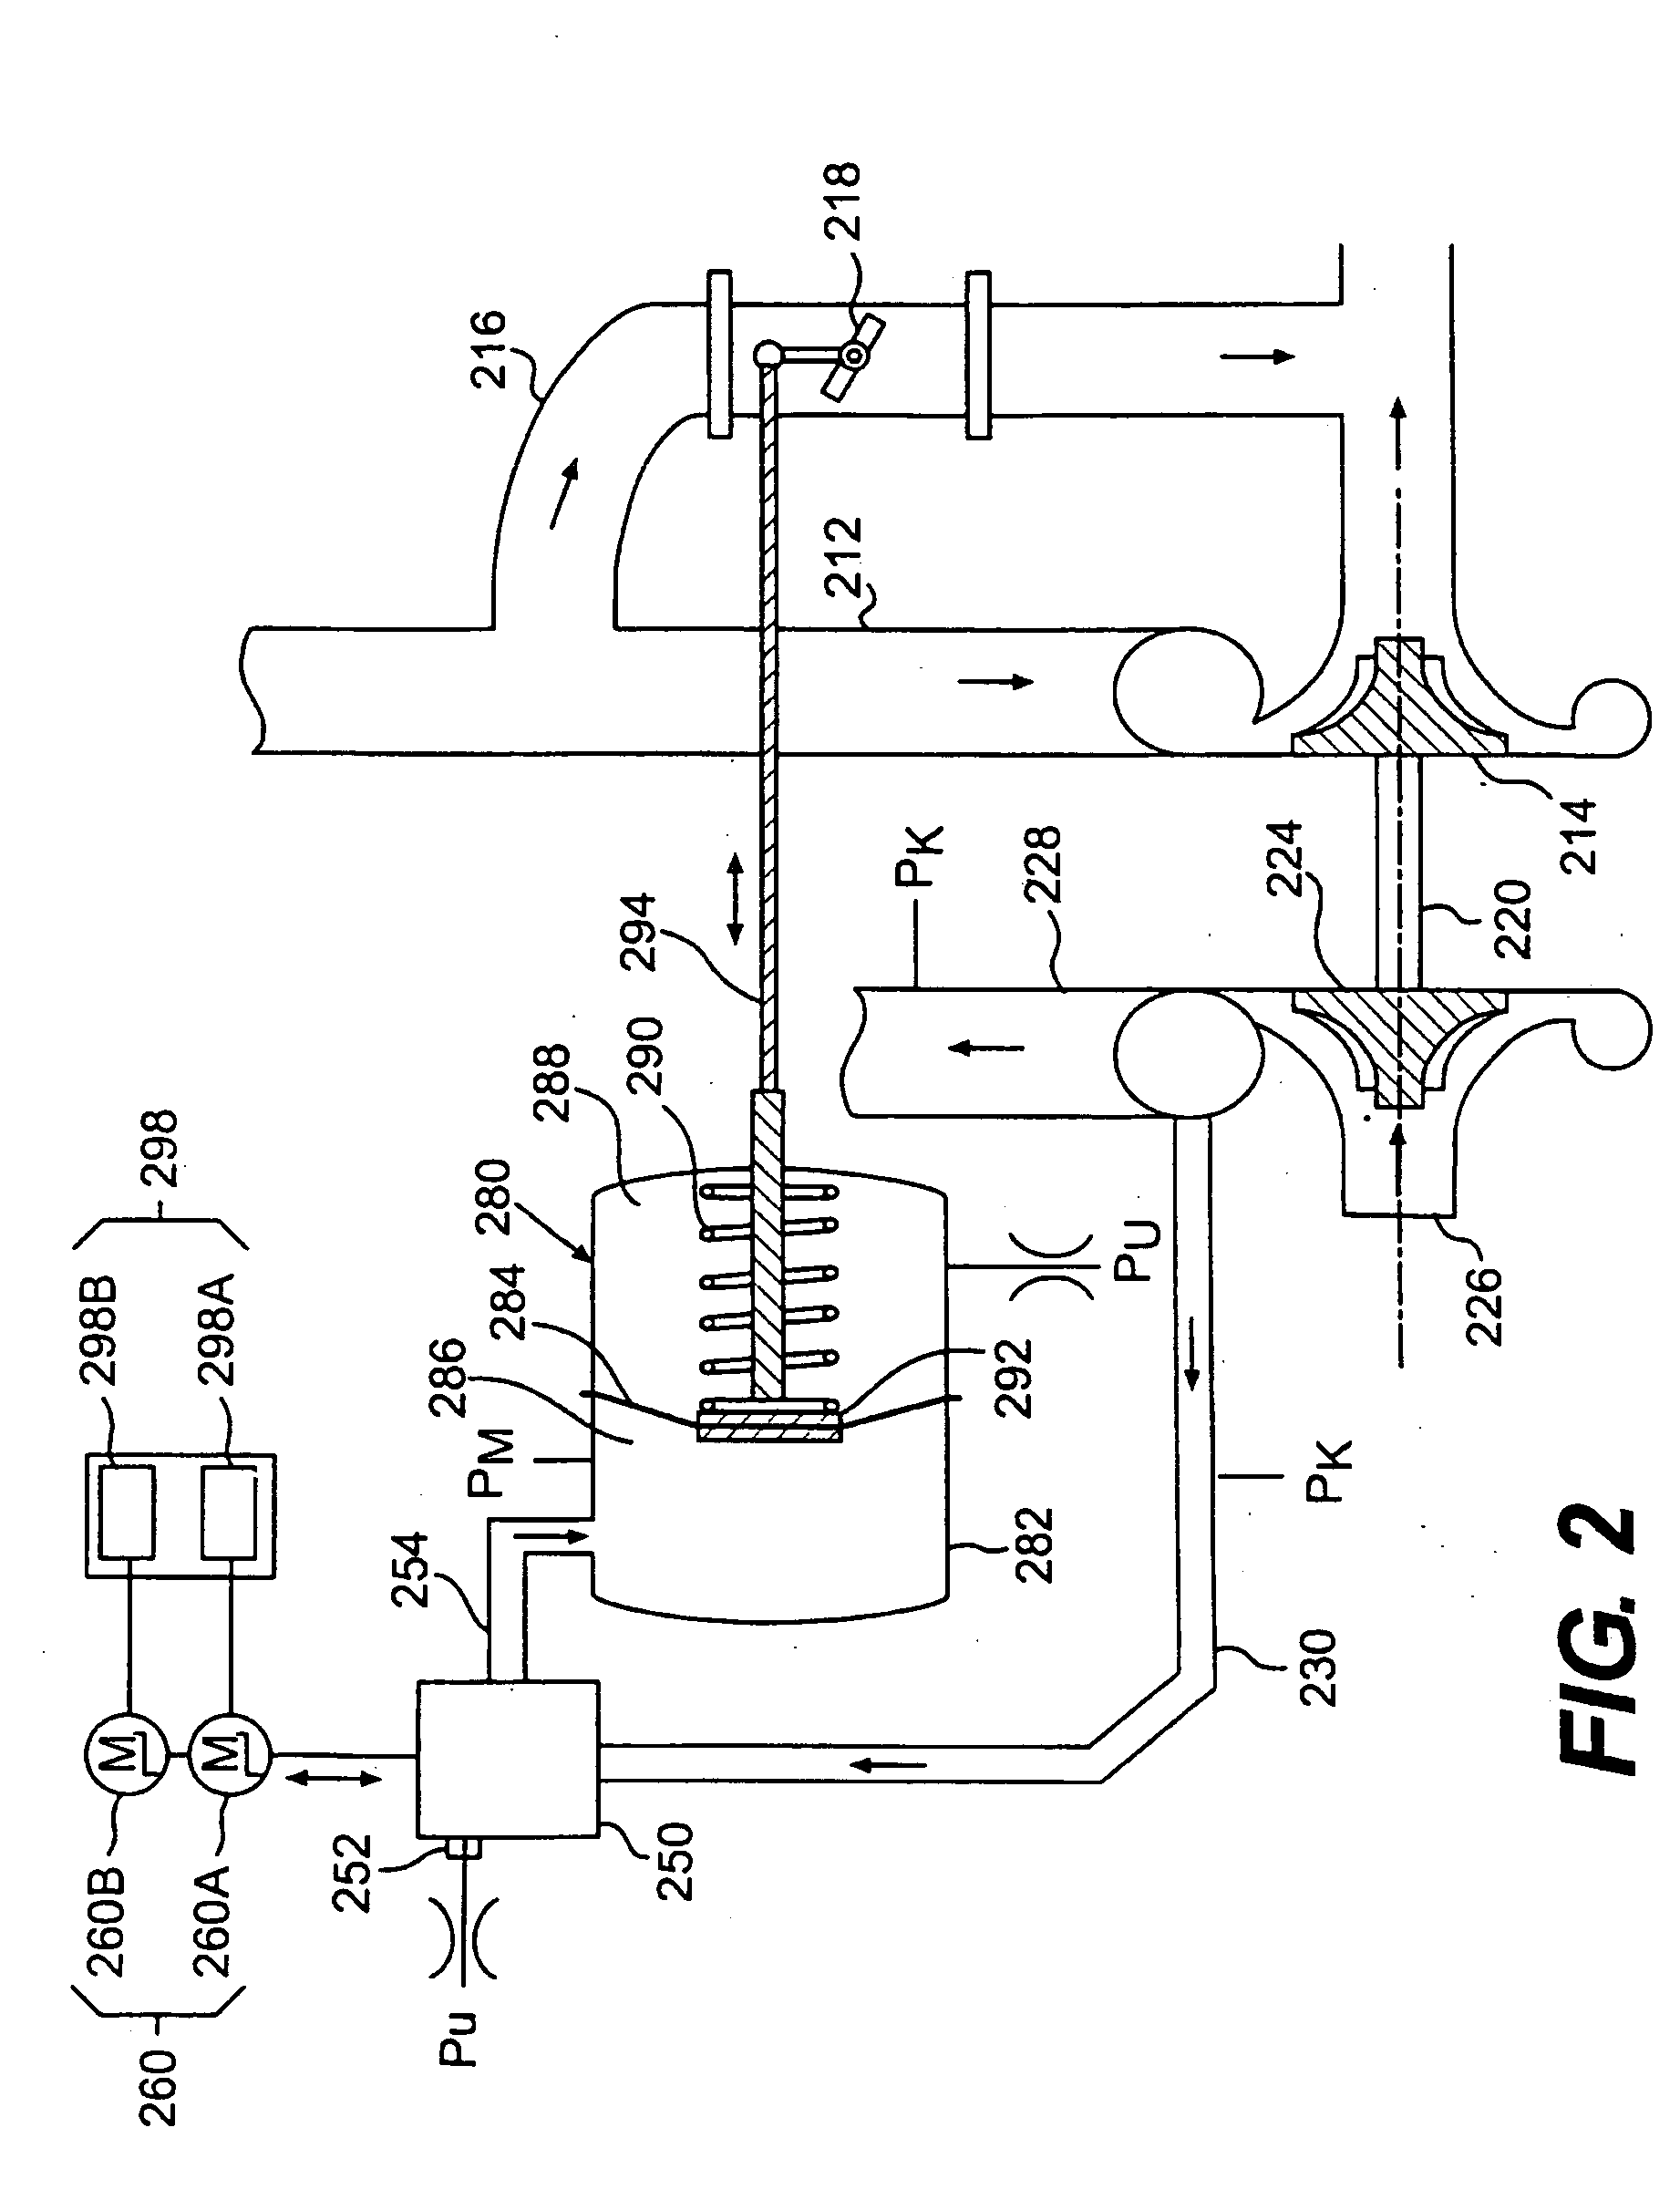 Turbocharger control system and propeller control system by a motor